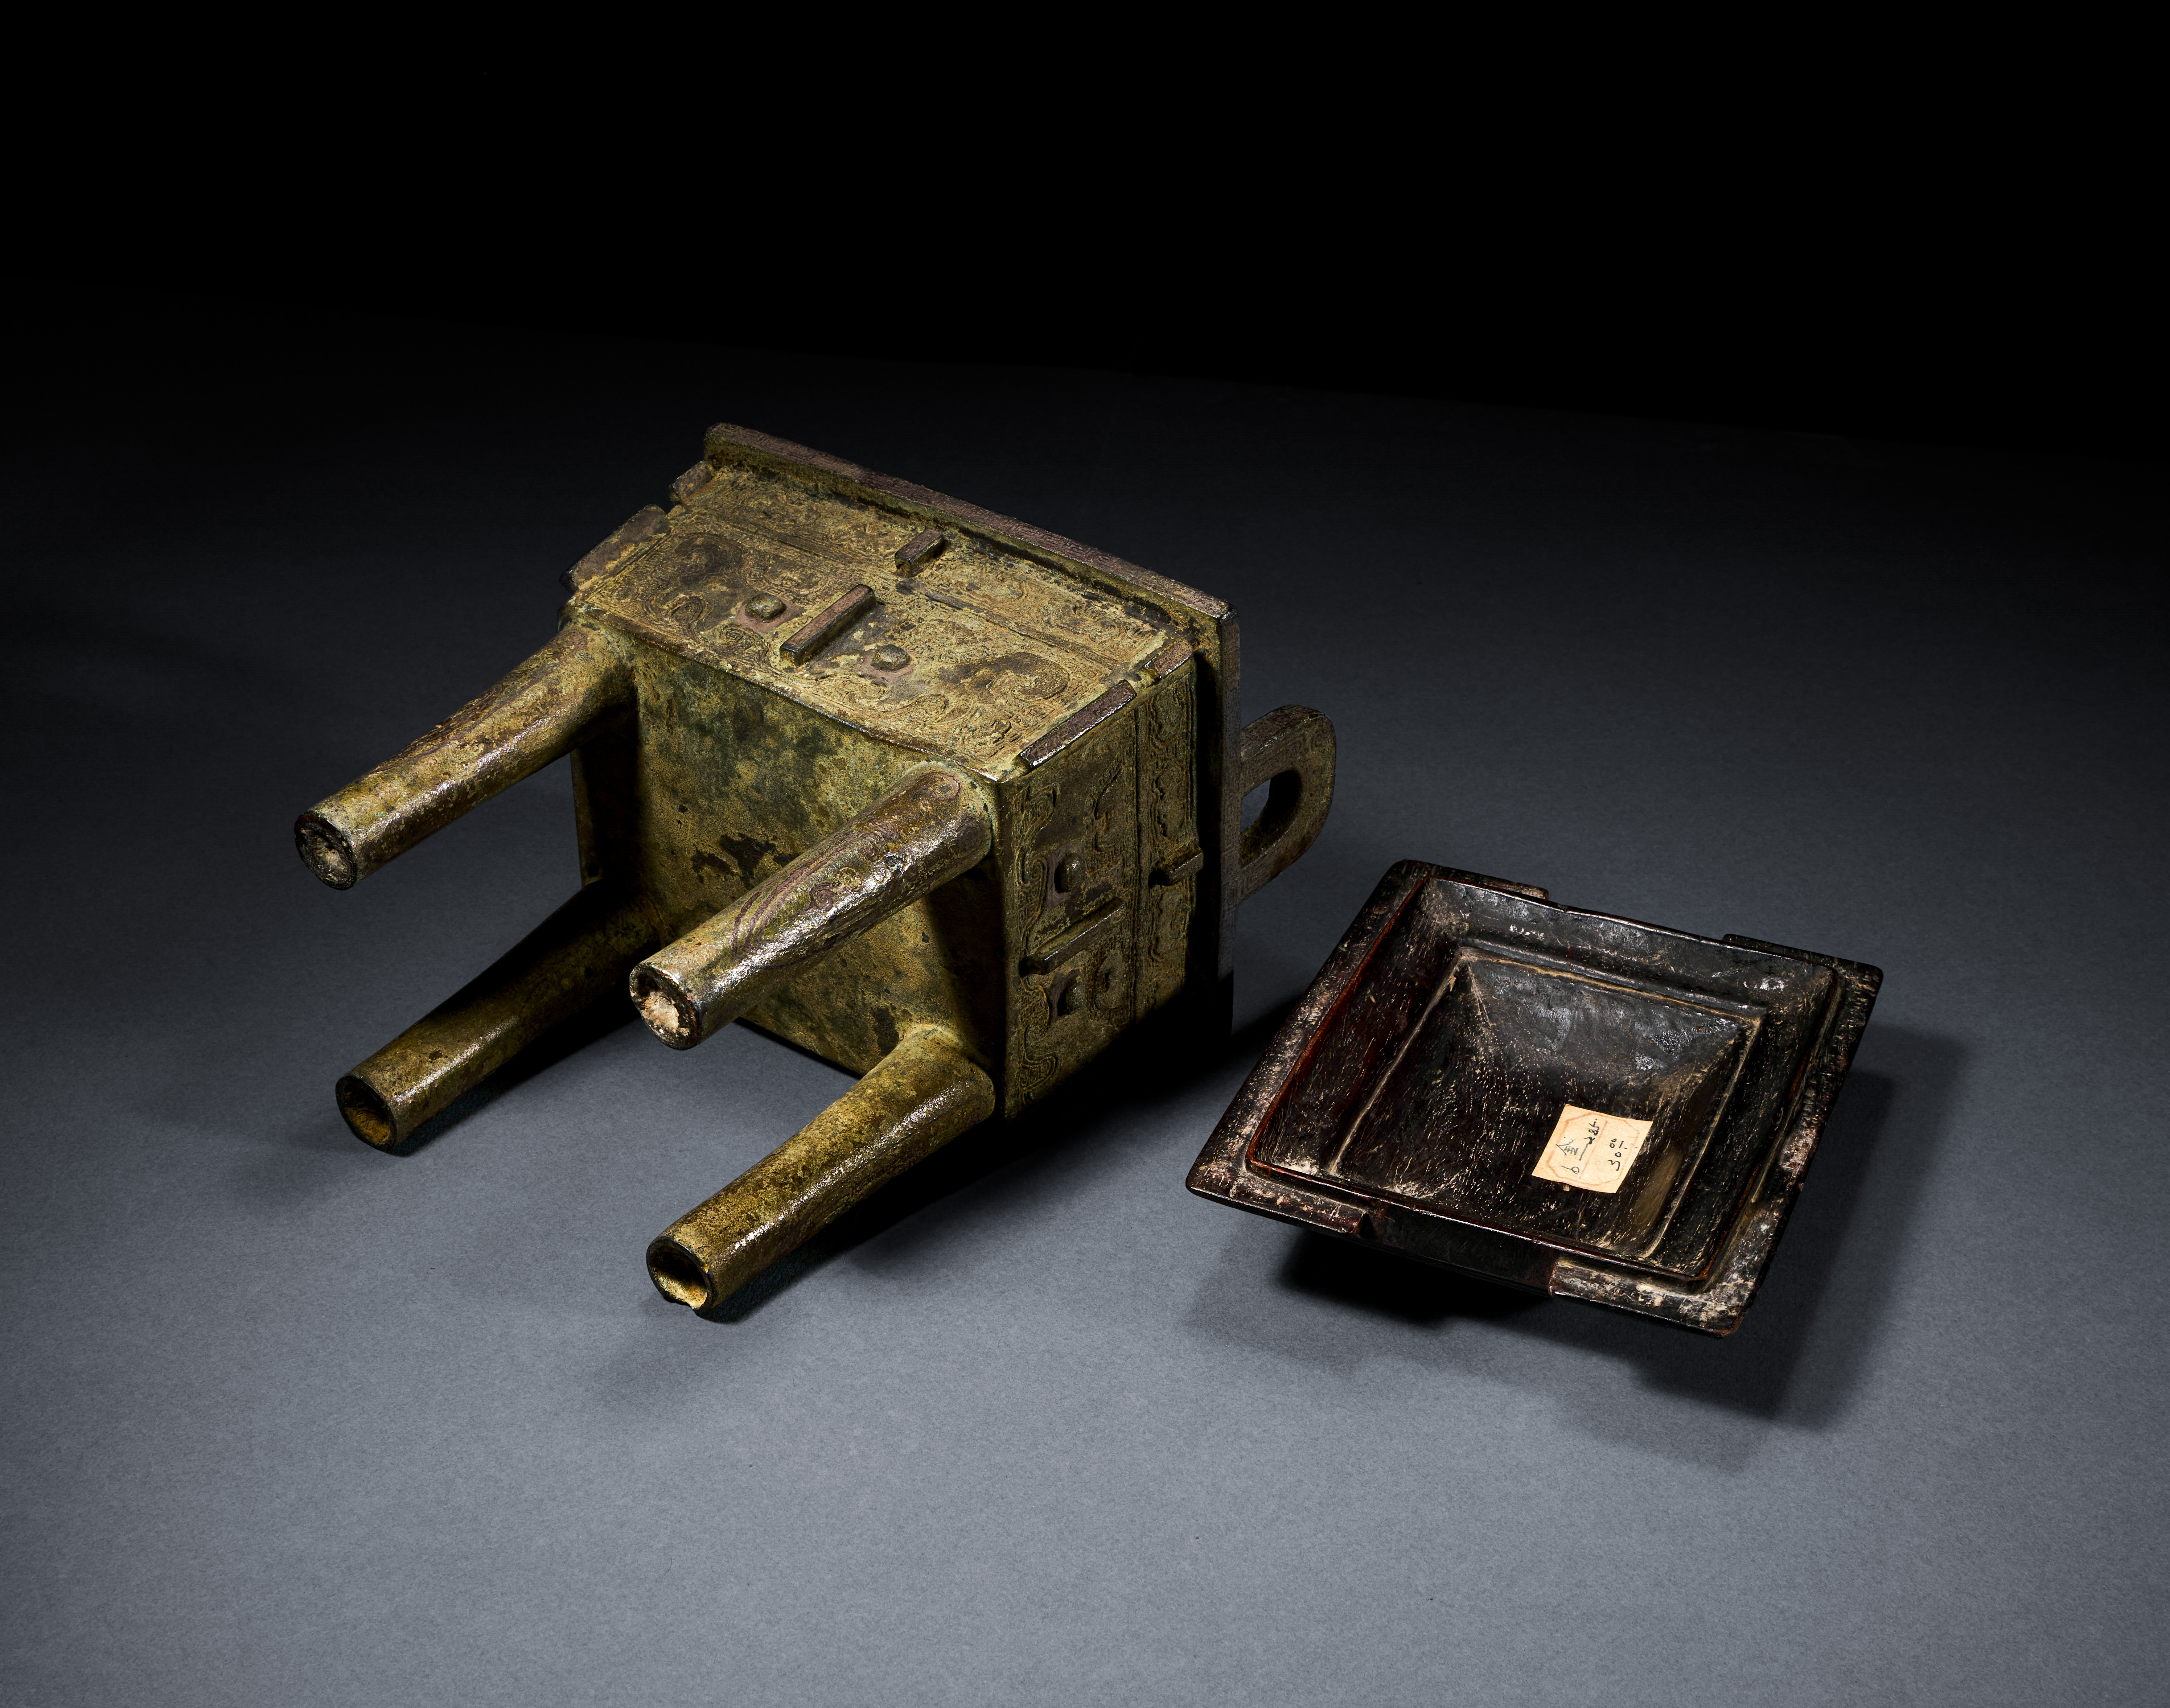 A BRONZE RITUAL RECTANGULAR FOOD VESSEL, FANGDING, LATE SHANG DYNASTY, ANYANG, 12TH-11TH CENTURY BC - Image 4 of 4